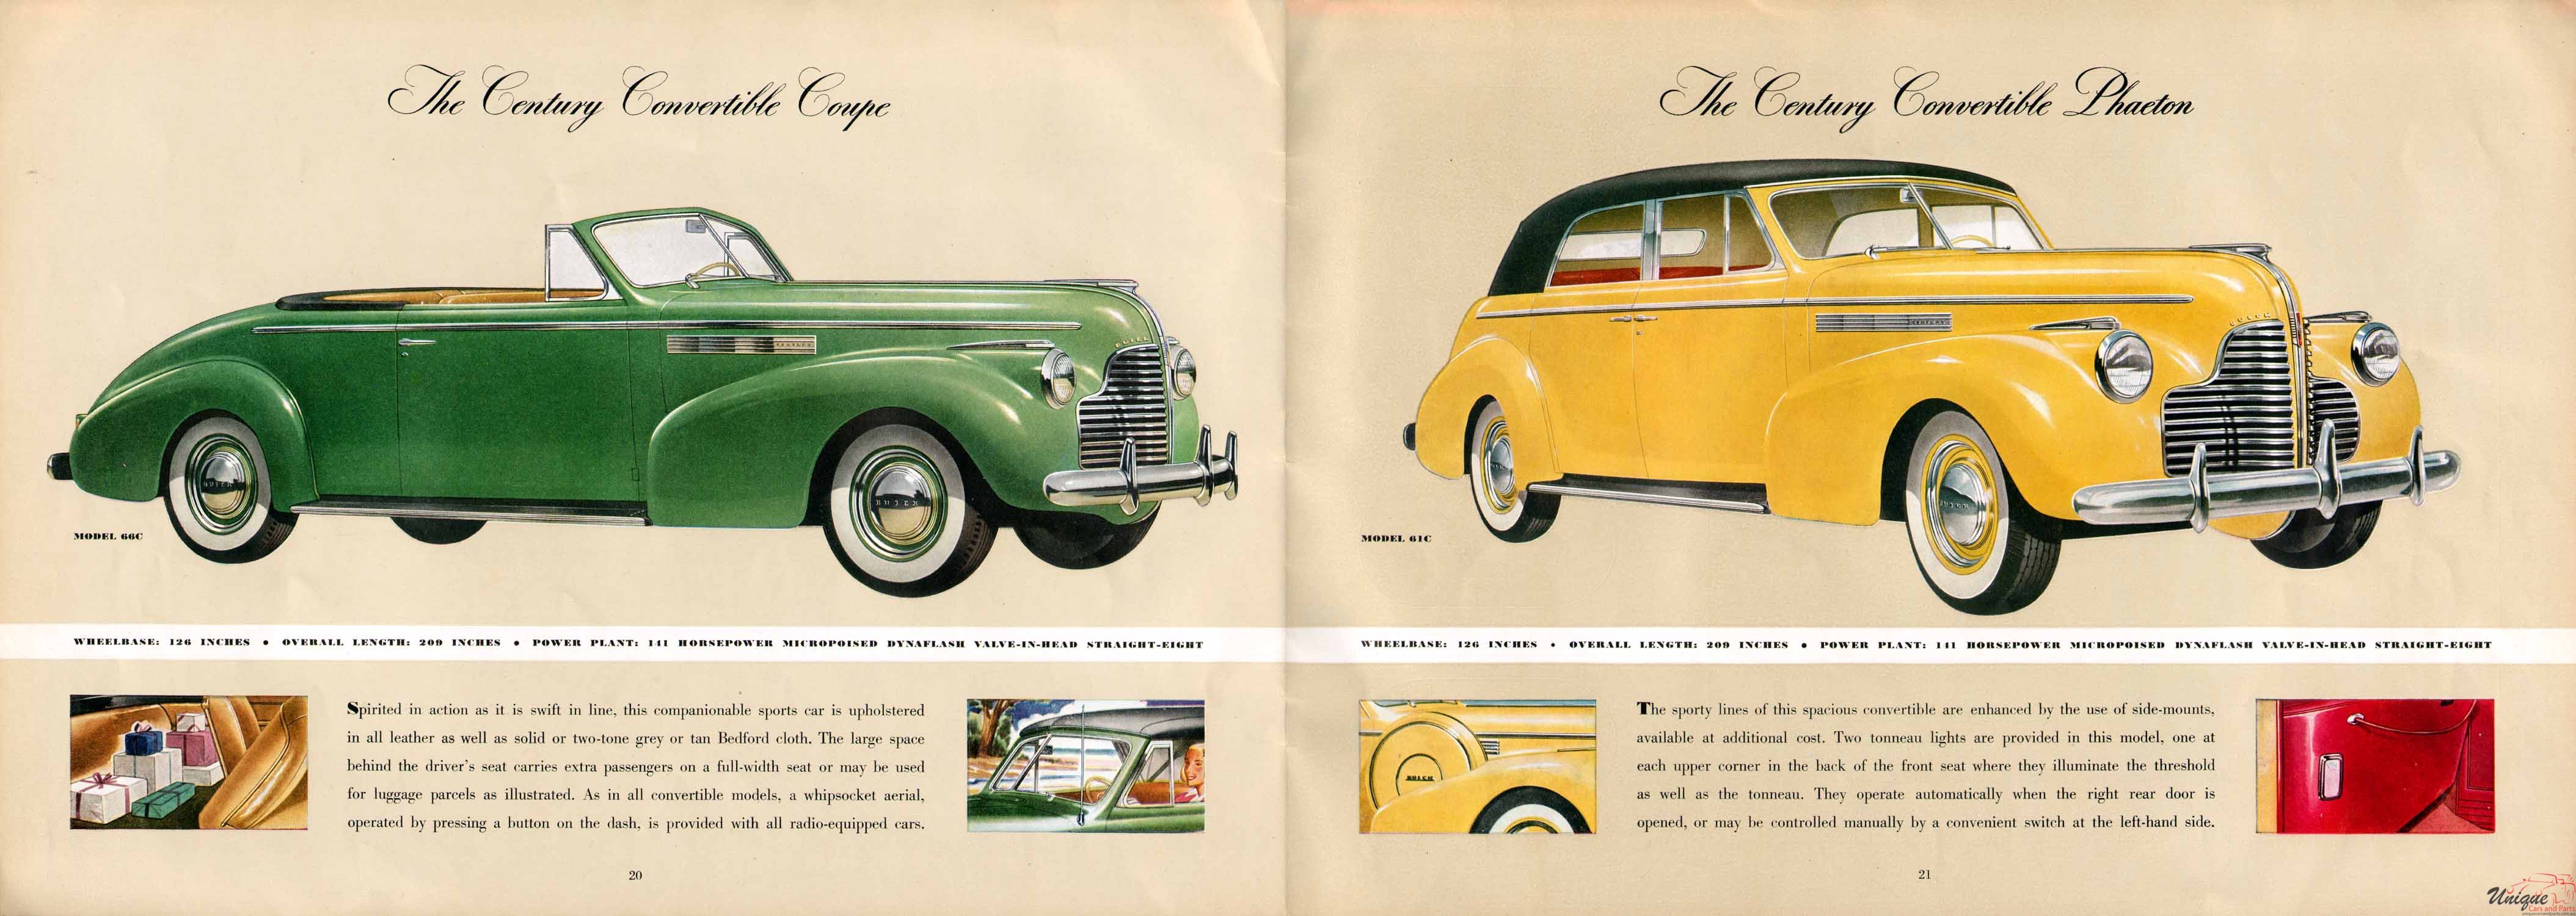 1940 Buick Brochure Page 2